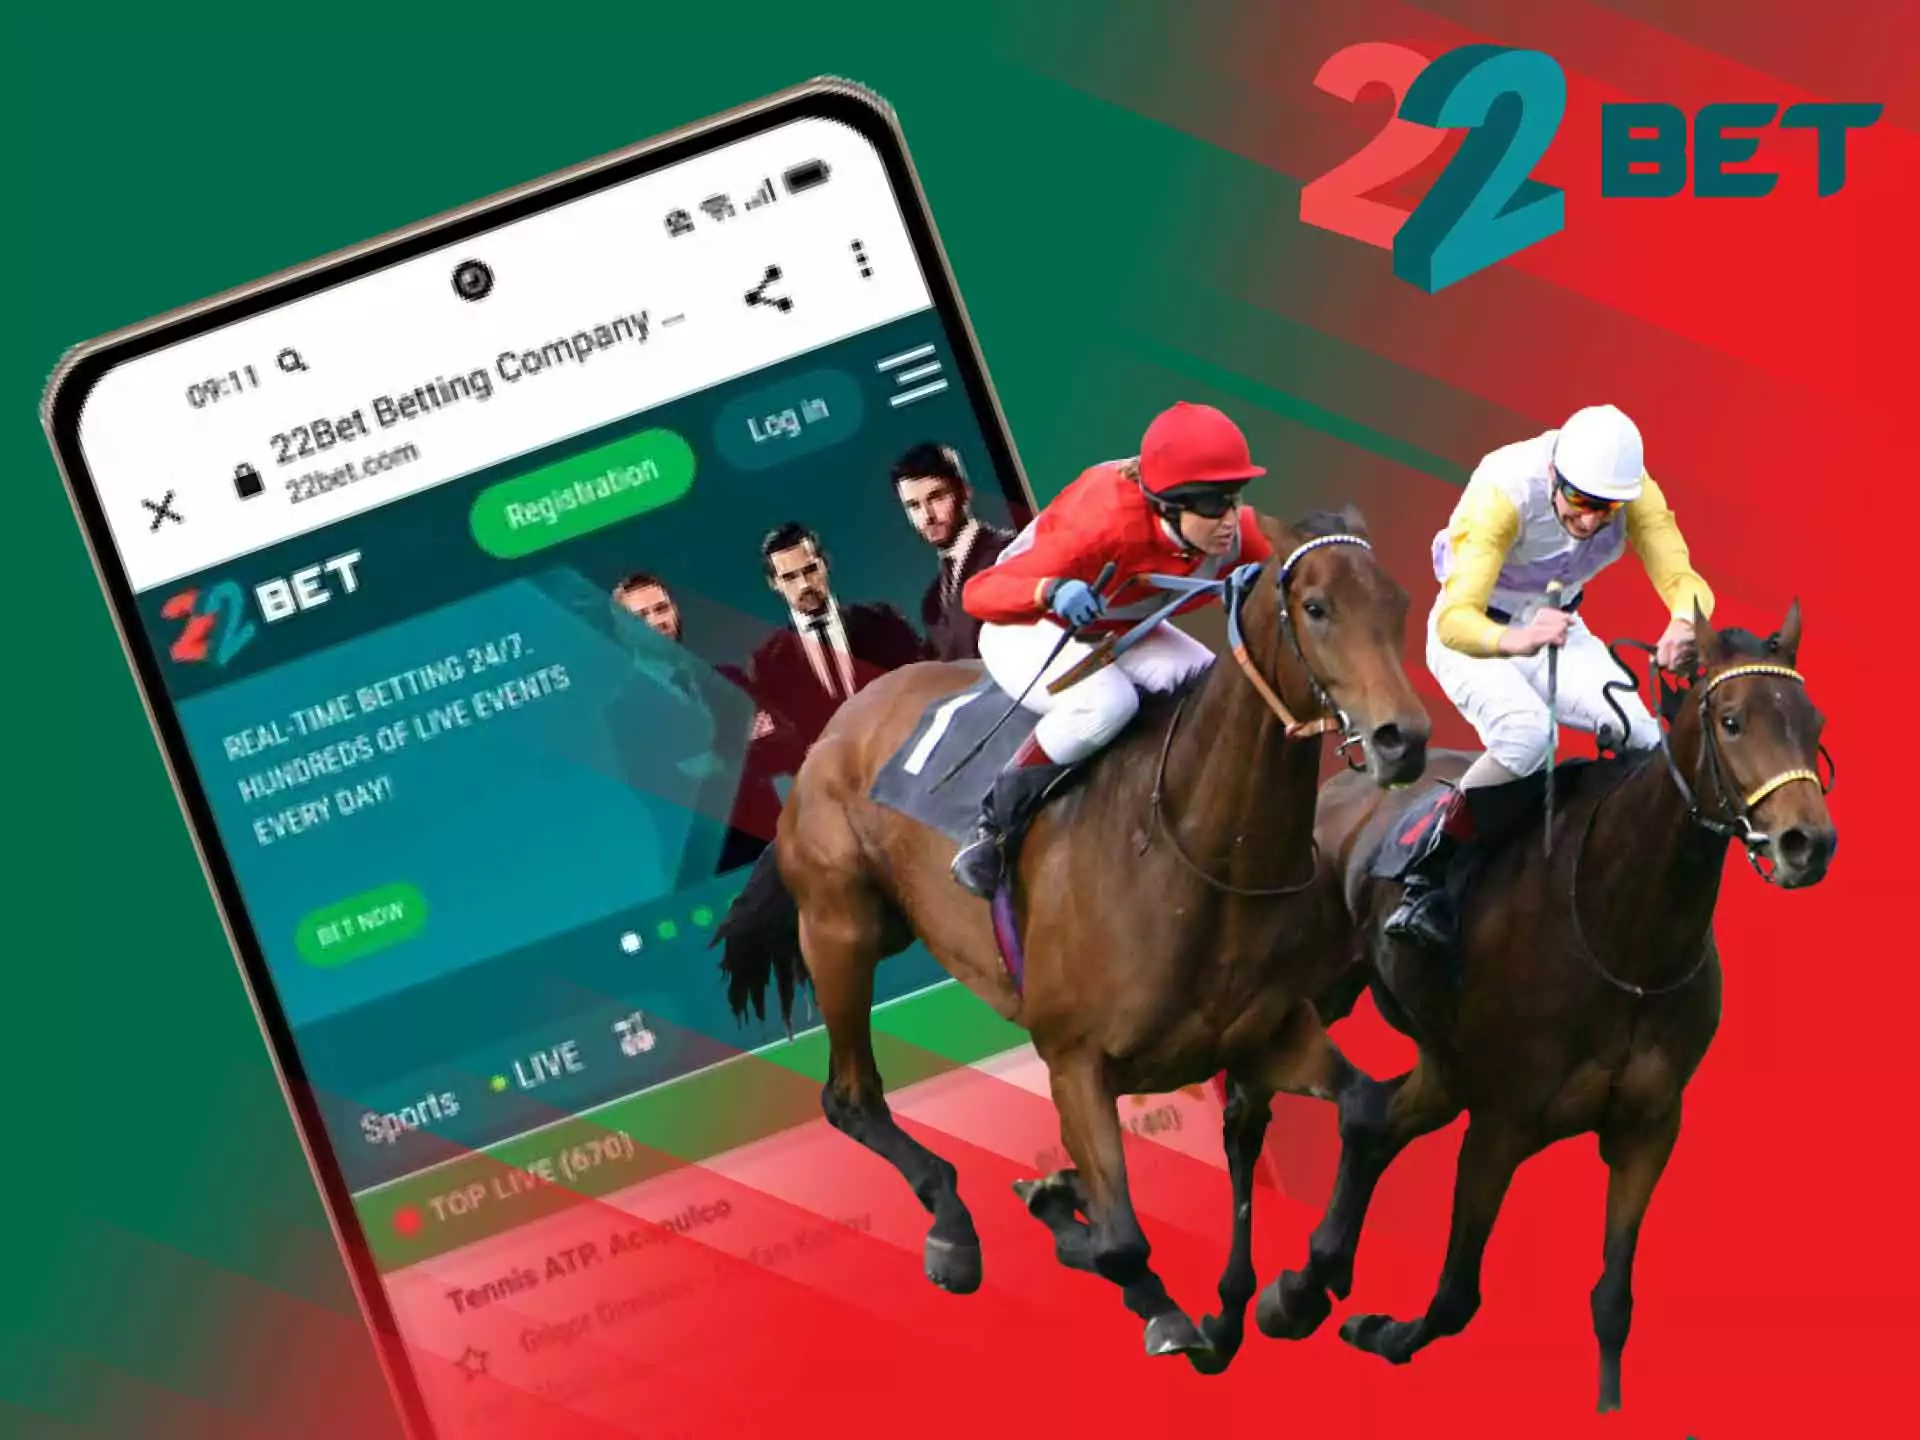 Horse racing is also available for betting at 22bet.